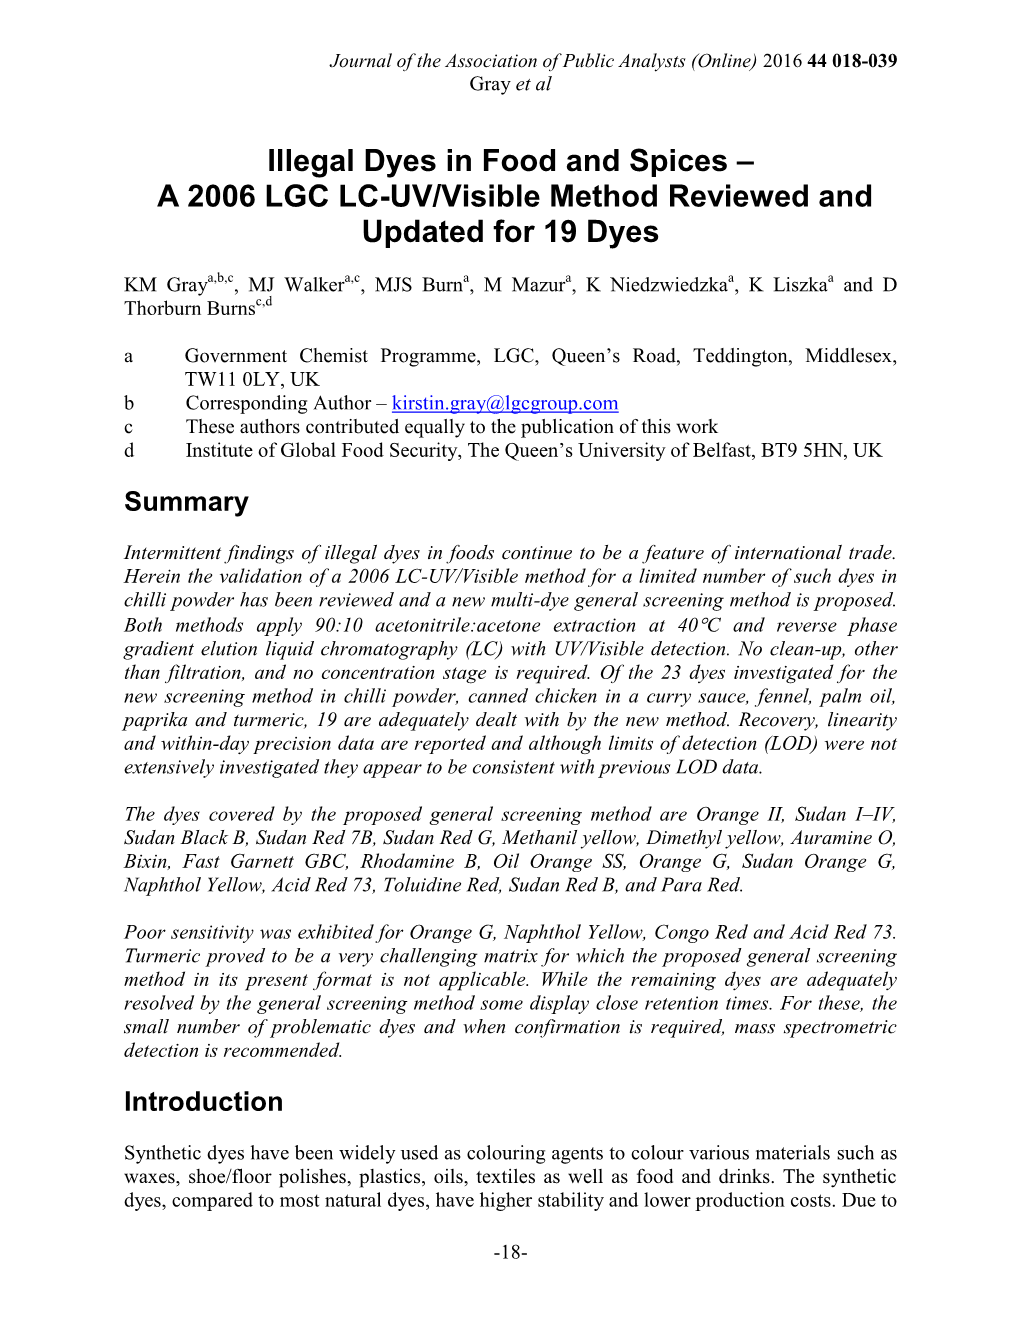 Illegal Dyes in Food and Spices – a 2006 LGC LC-UV/Visible Method Reviewed and Updated for 19 Dyes